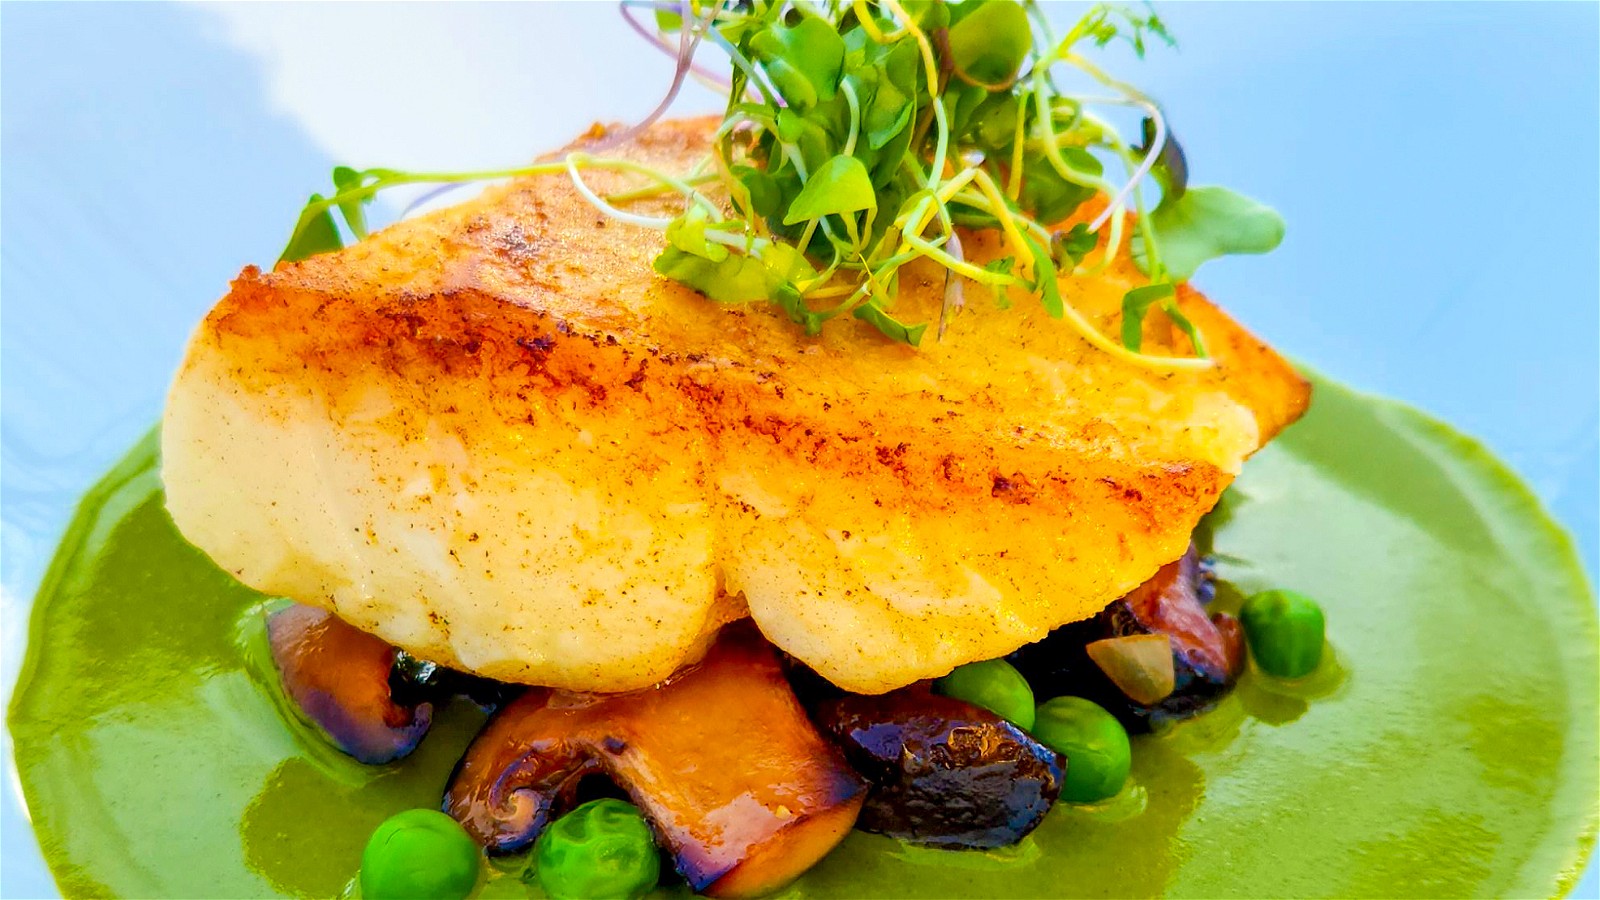 Wild Caught Cod with Roasted Mushrooms – The Popsie Fish Company